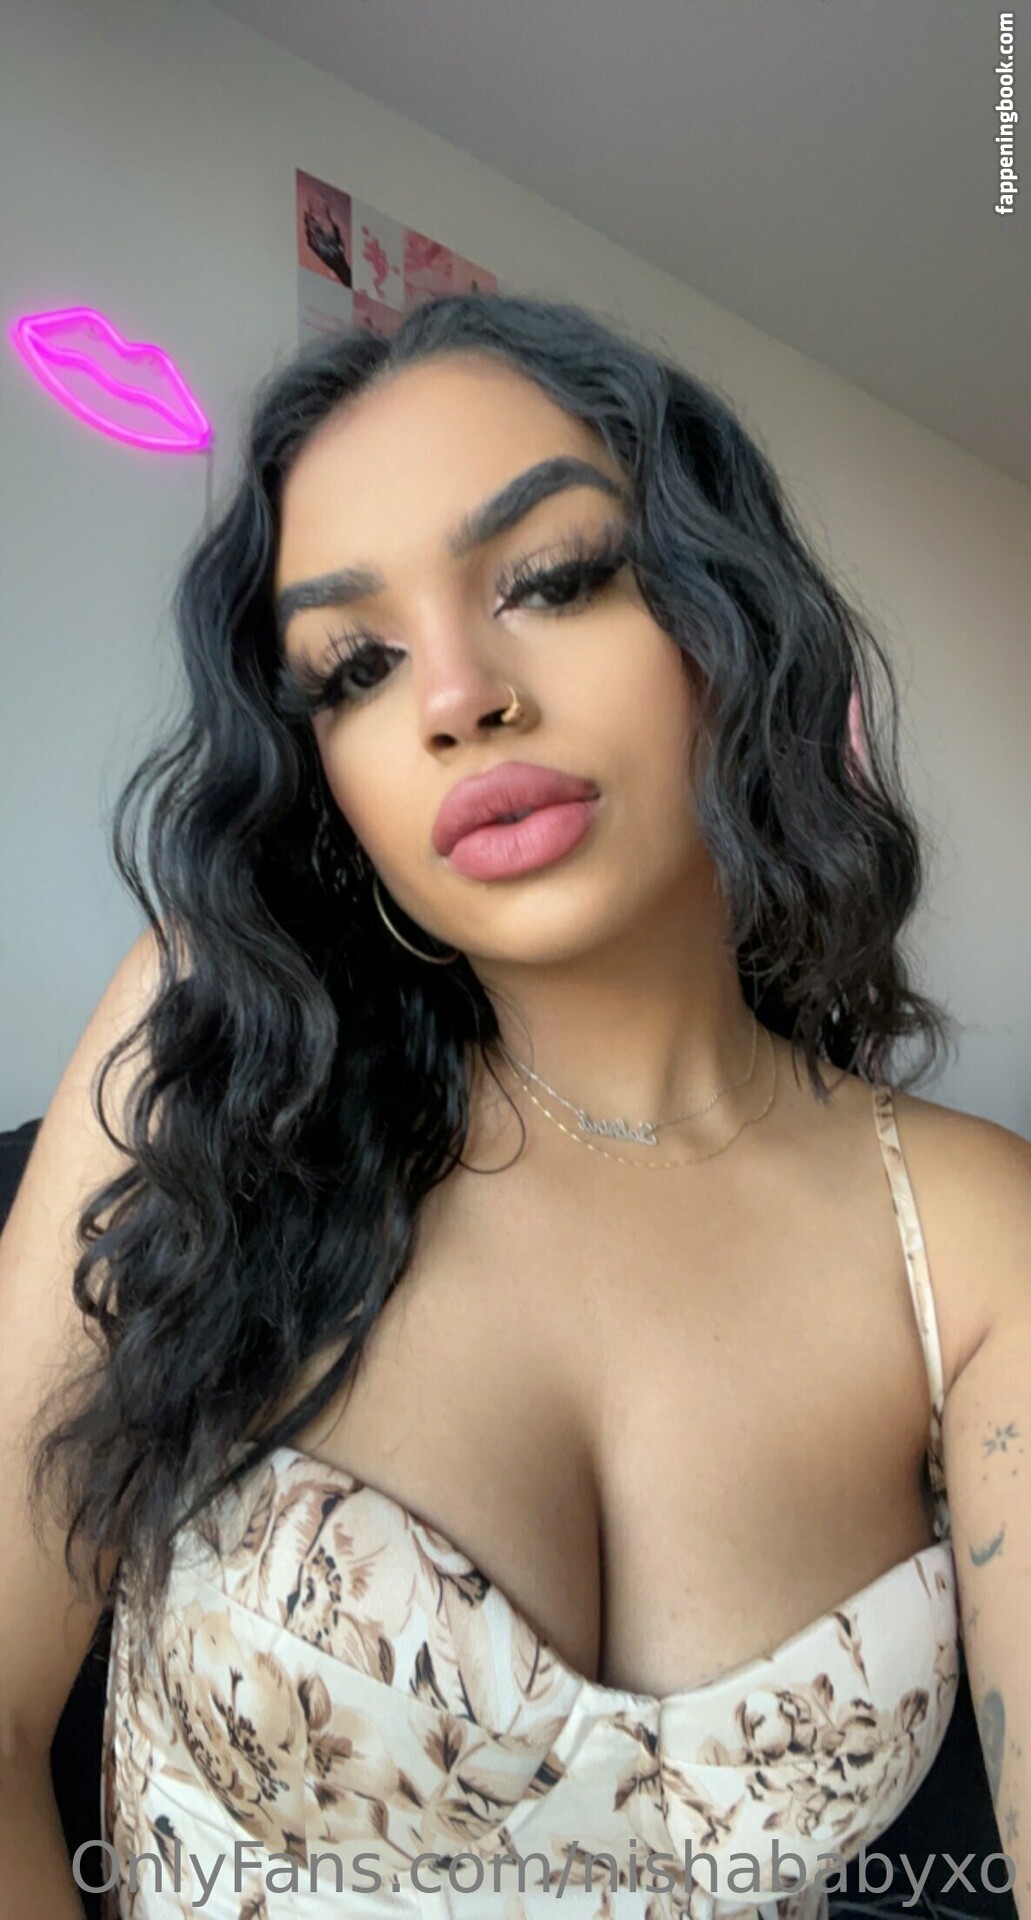 nishababyxo onlyfans the fappening fappeningbook